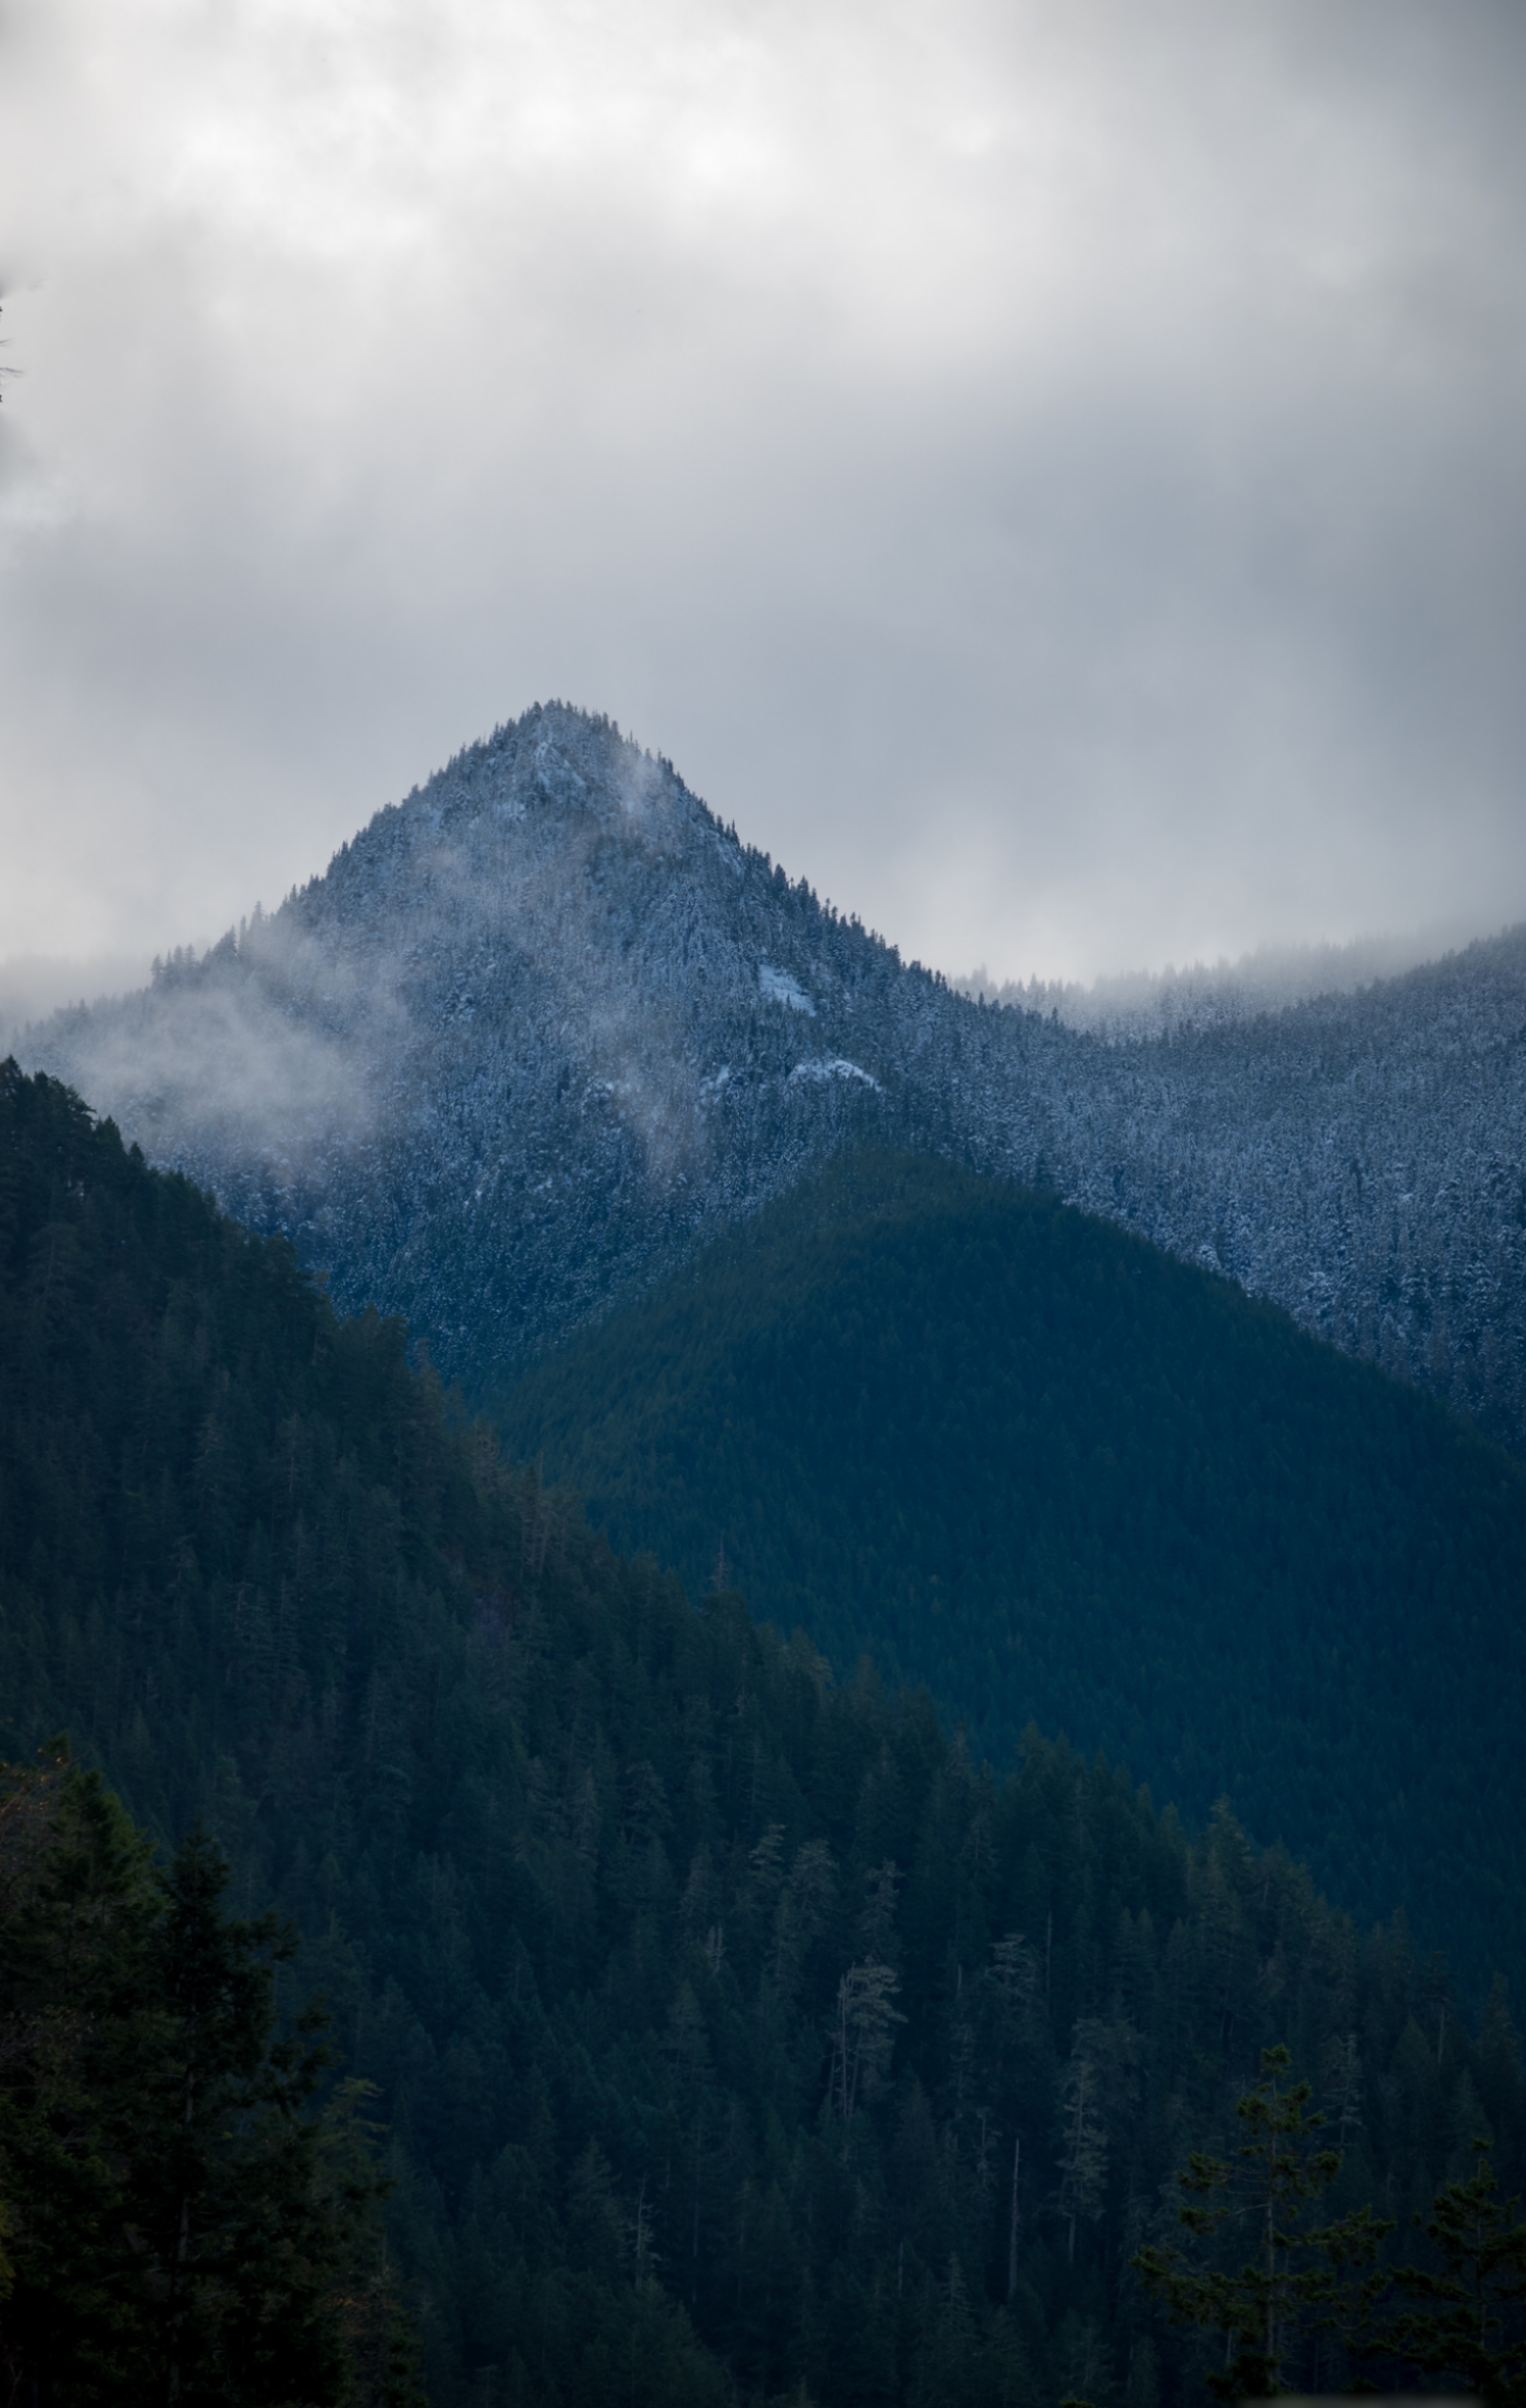 Trees Olympic National Park National Park Forest Nature Mountains Jungle Mist Landscape Winter 1553x2451